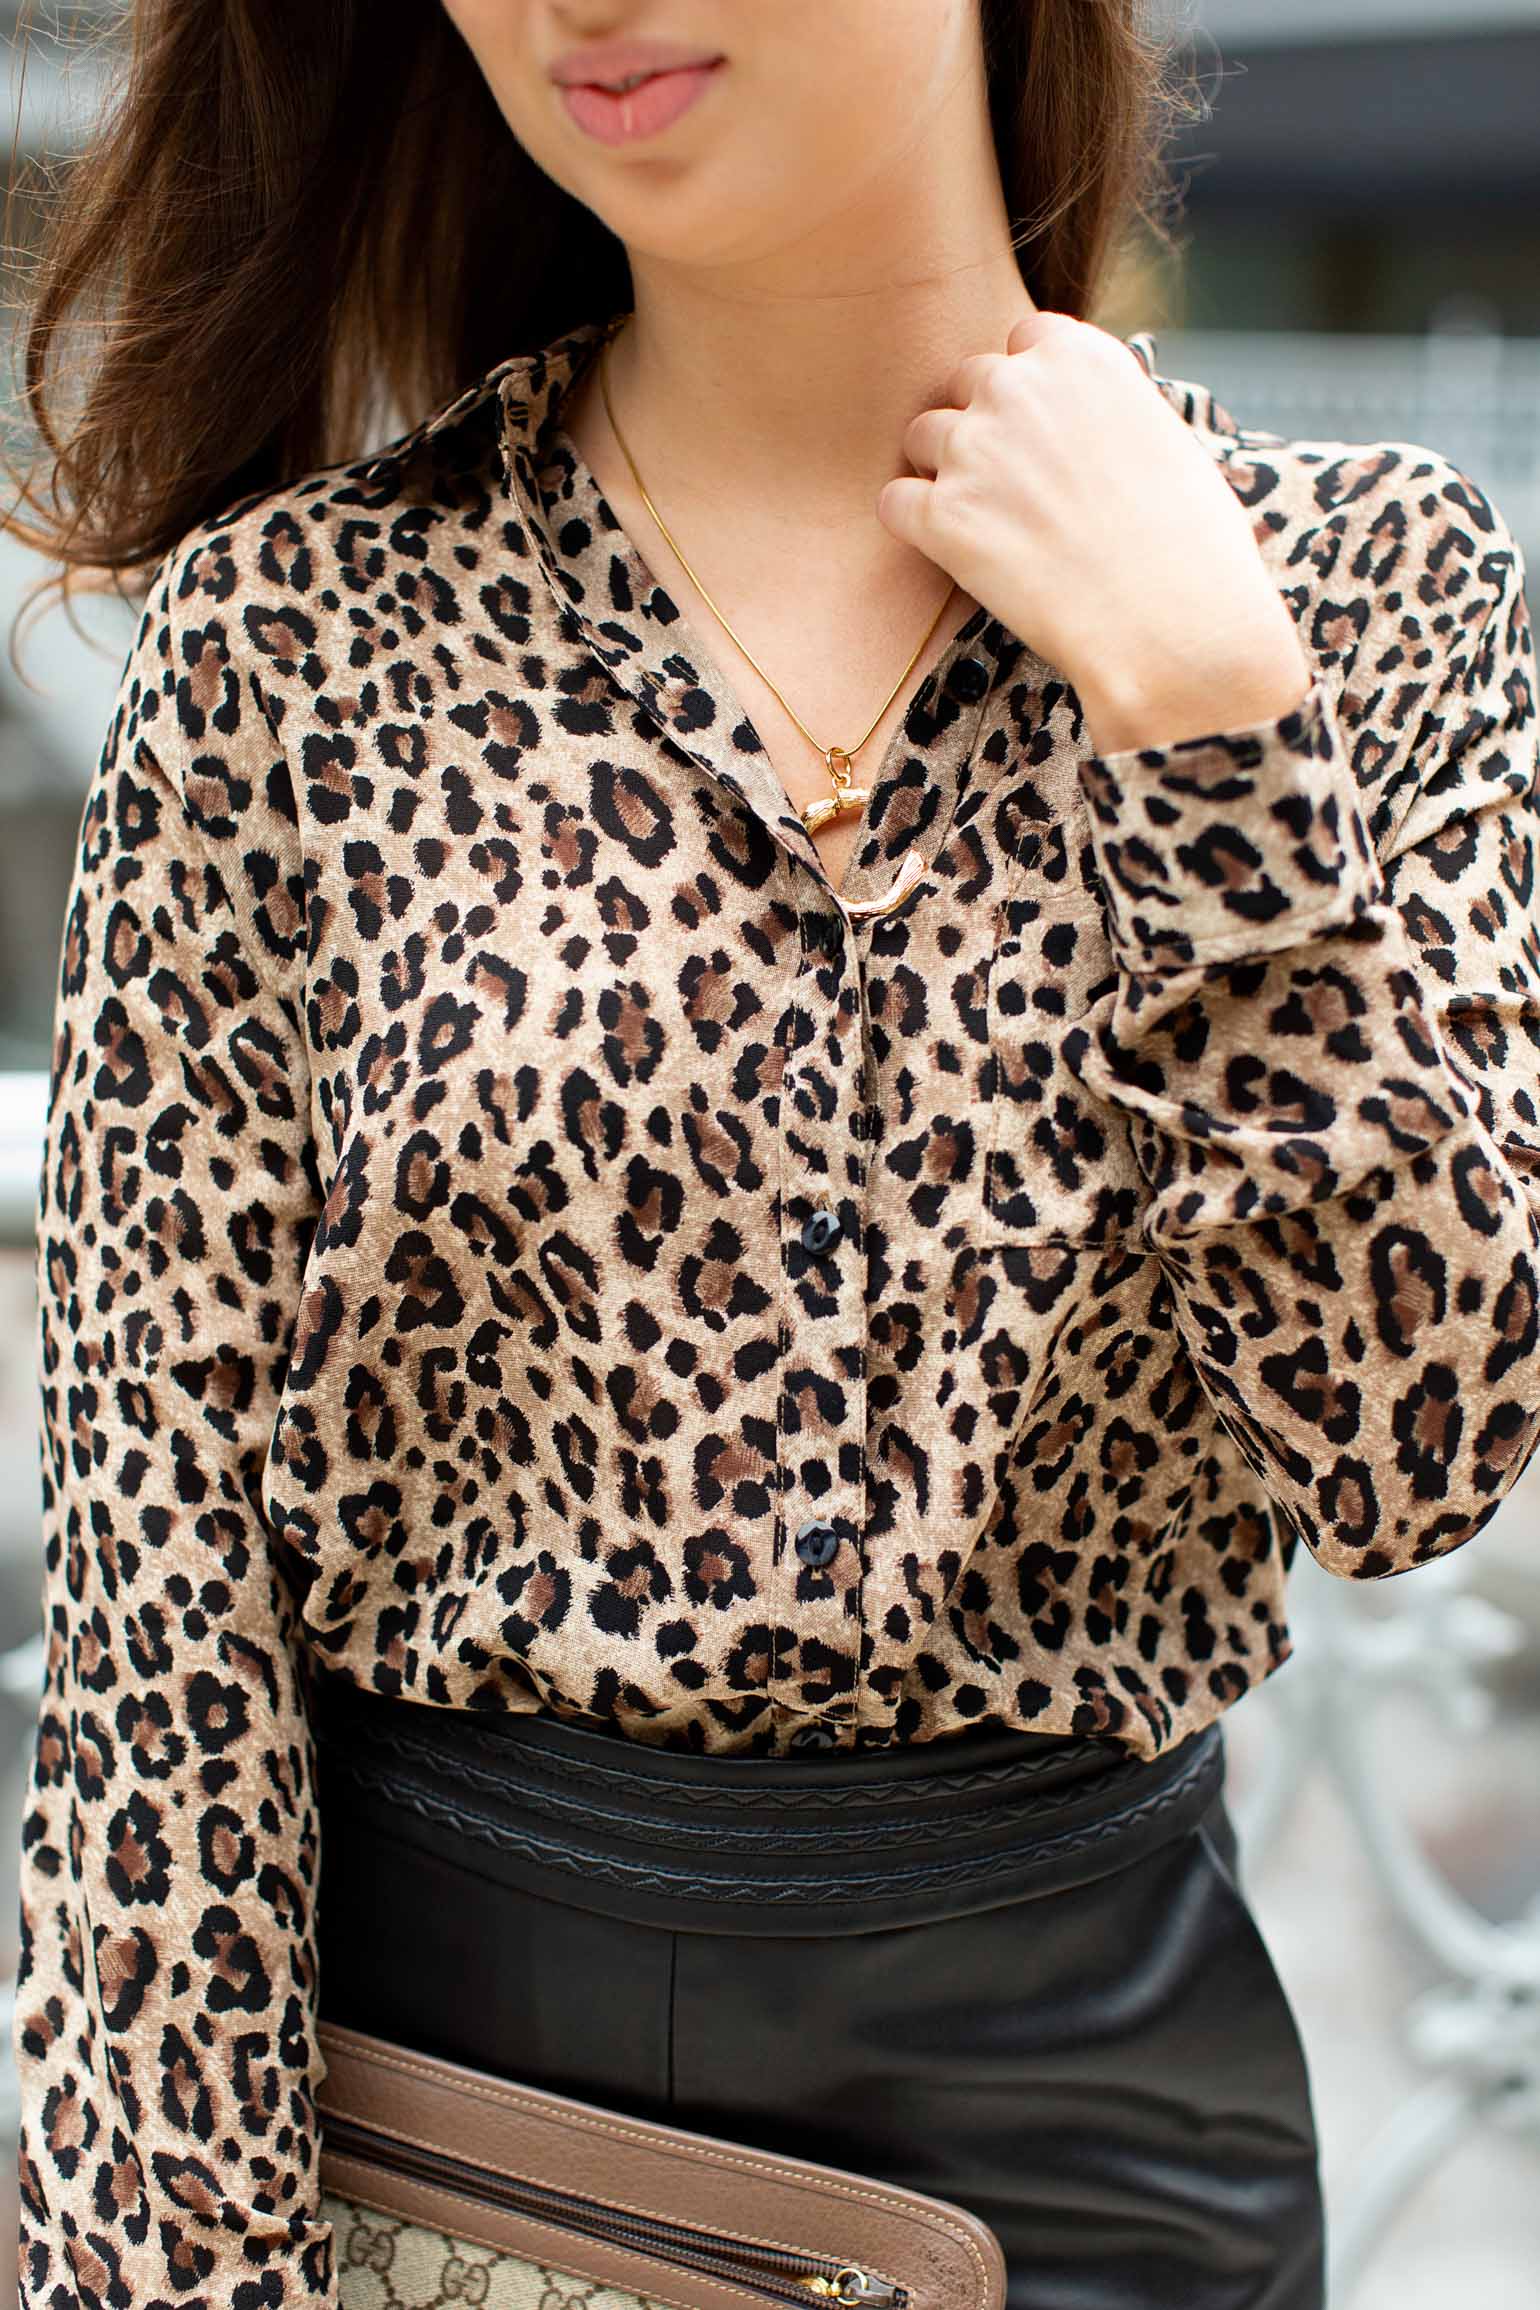 Leopard & Leather: Leopard & Leather: Winter Date Night Outfit - The ...